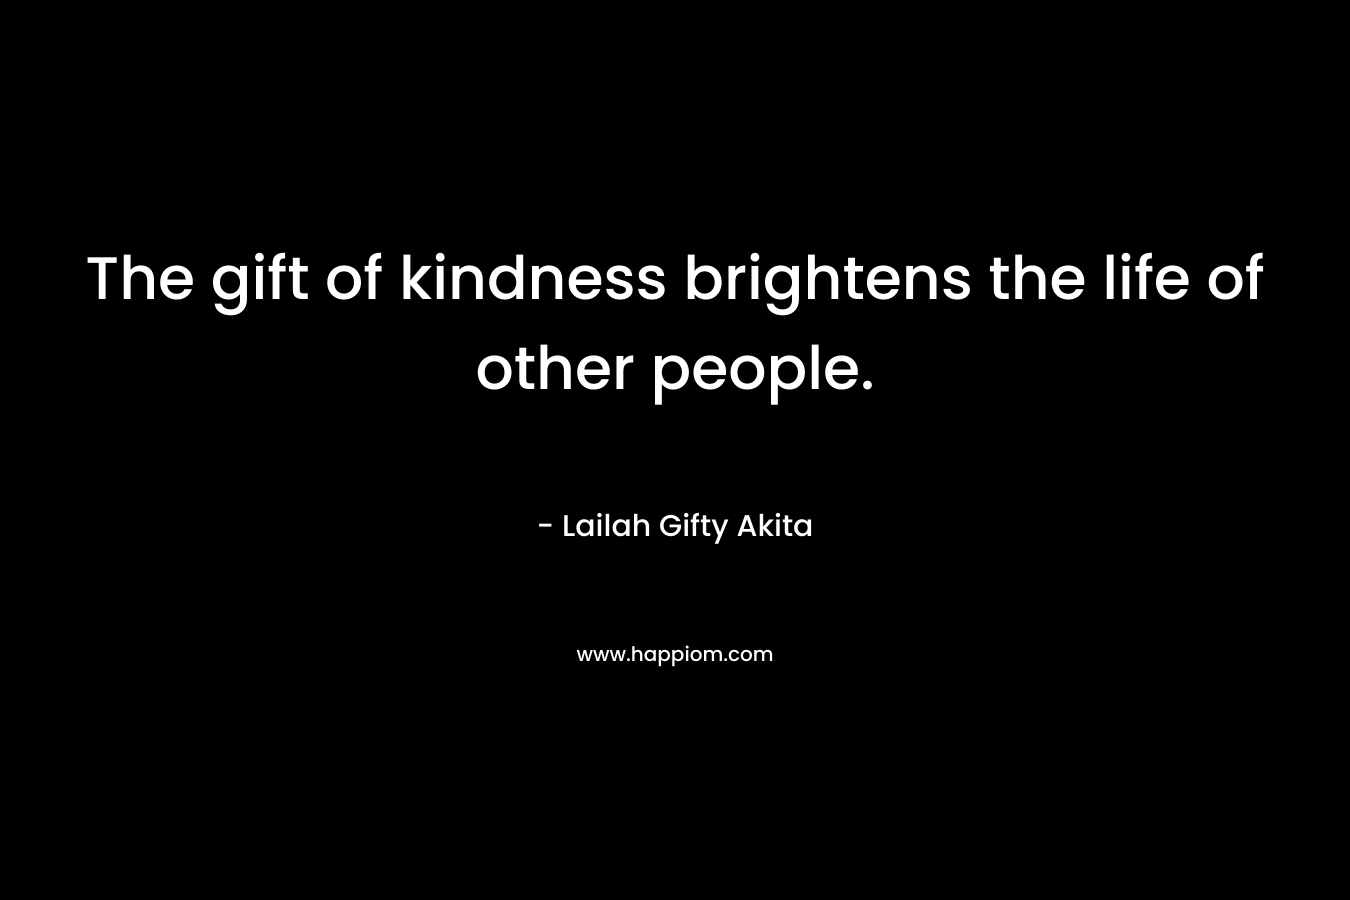 The gift of kindness brightens the life of other people.